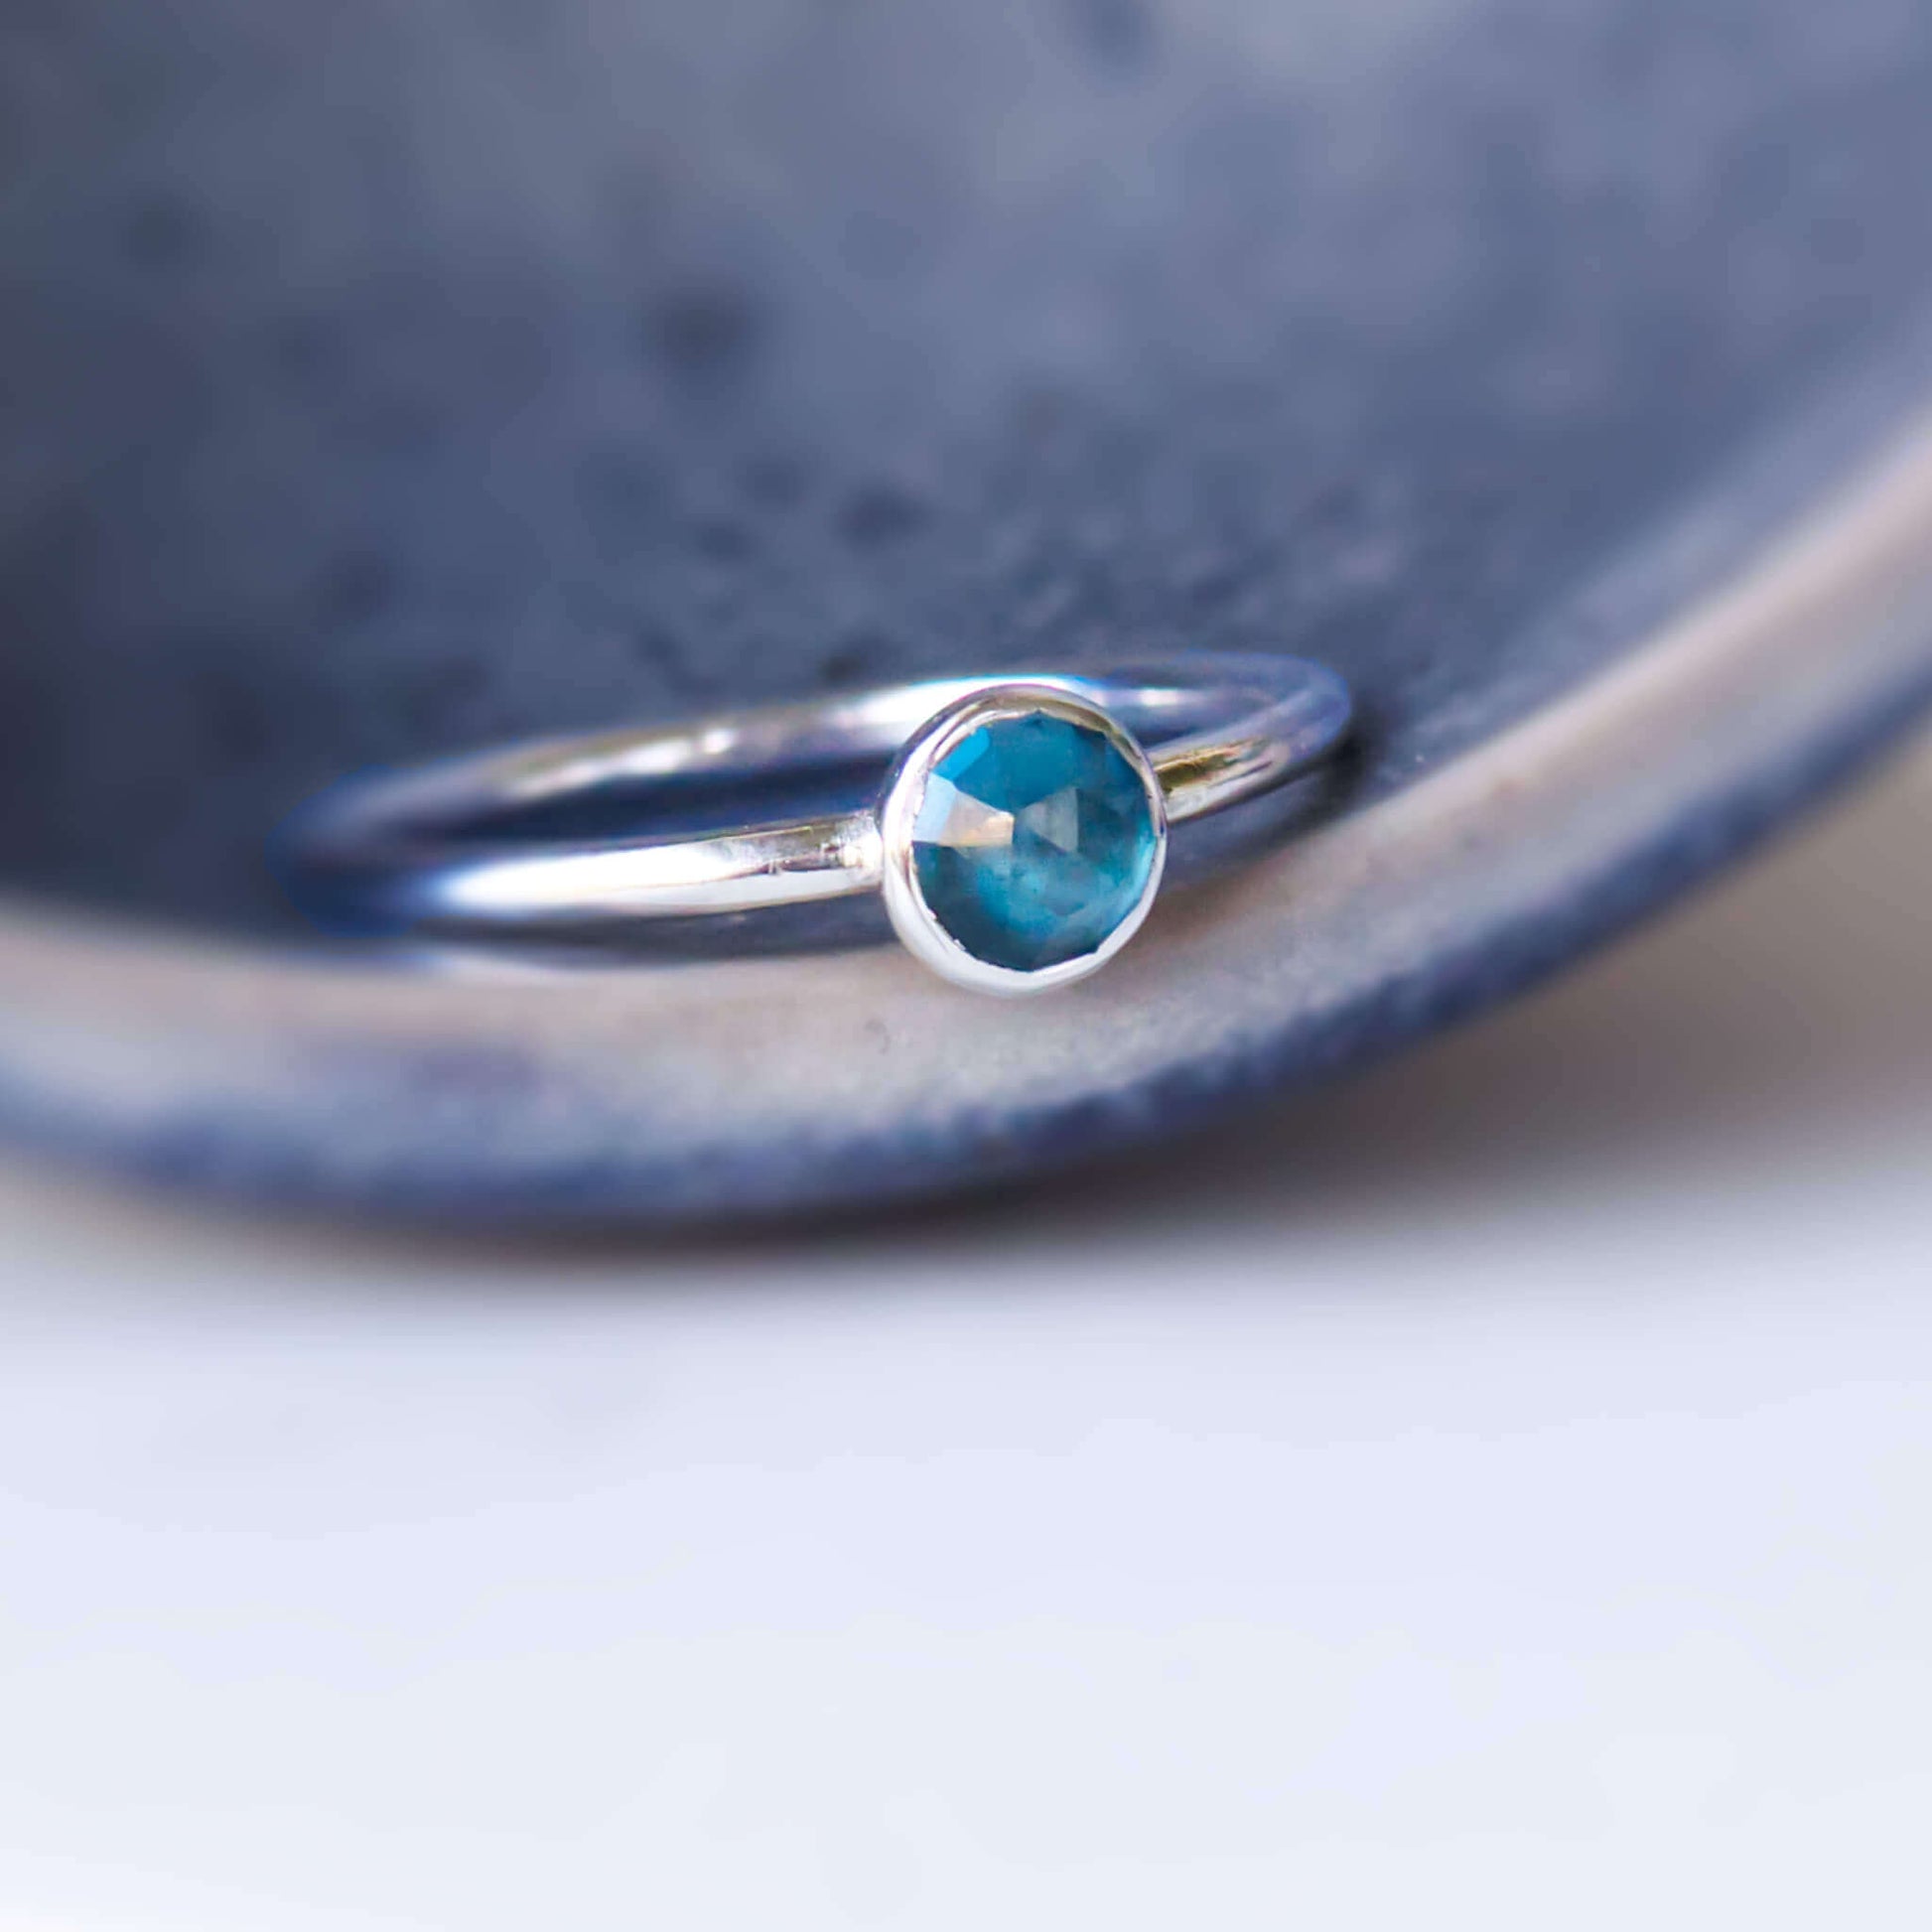 London Blue Topaz round gemstone ring. Silver ring in a minimalist style with a simple round band and a undecorated 5mm round facet cut teal coloured Blue Topaz. Petrol blue gemstone on silver pictured on a textured grey ceramic dish